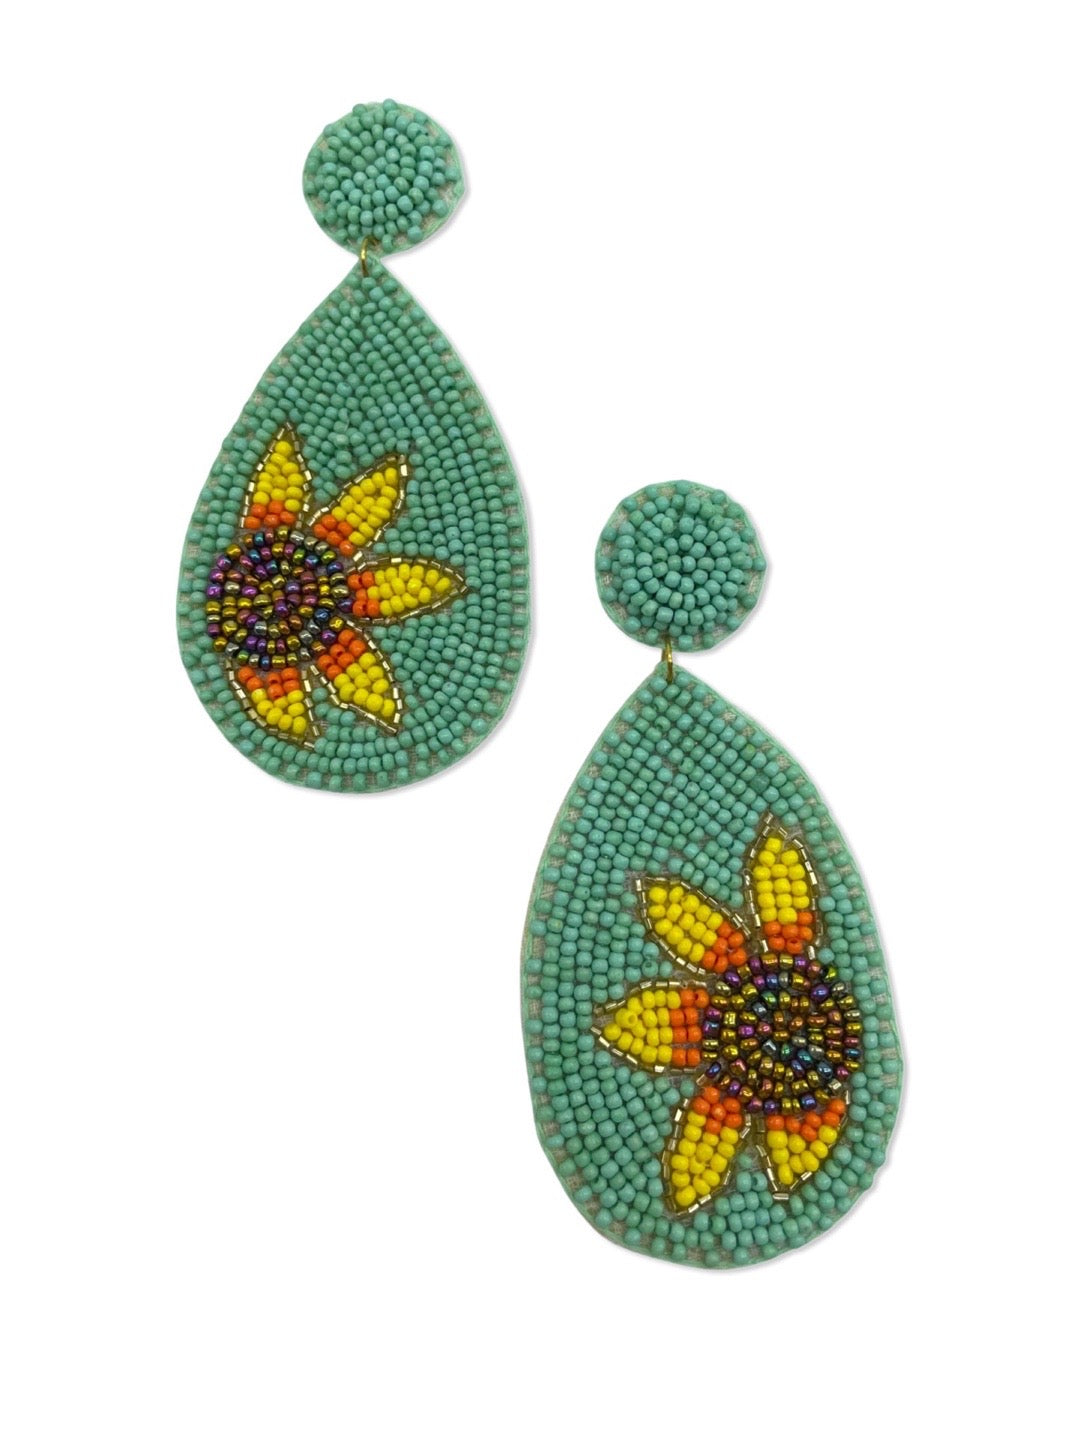 Handmade Earrings - Manufacturers & Suppliers in India